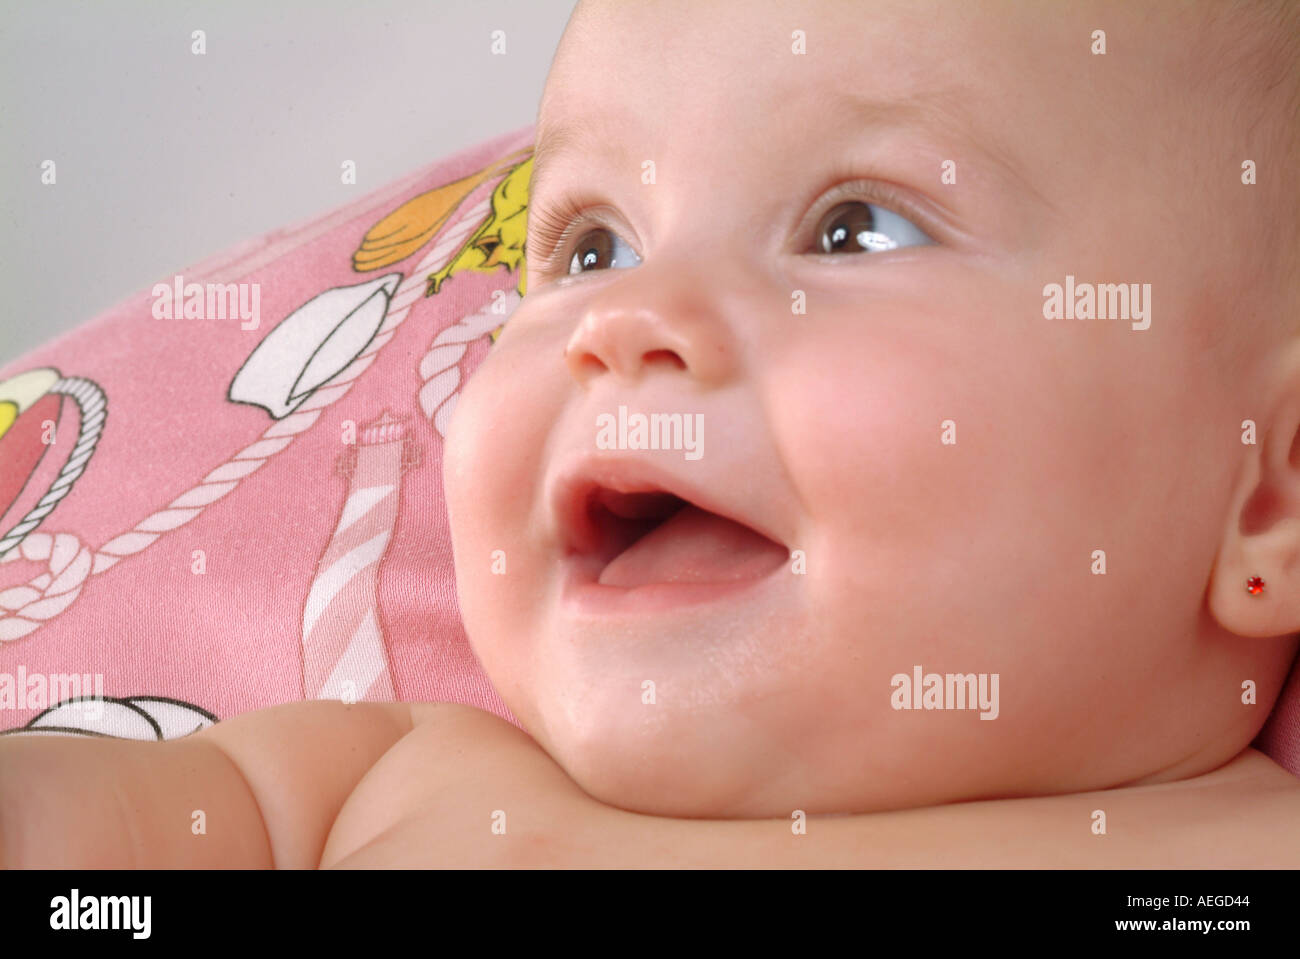 Baby hubby cute staring cheeky rosy closeup close up close up smile smiling expression emotion person people kid child baby Stock Photo